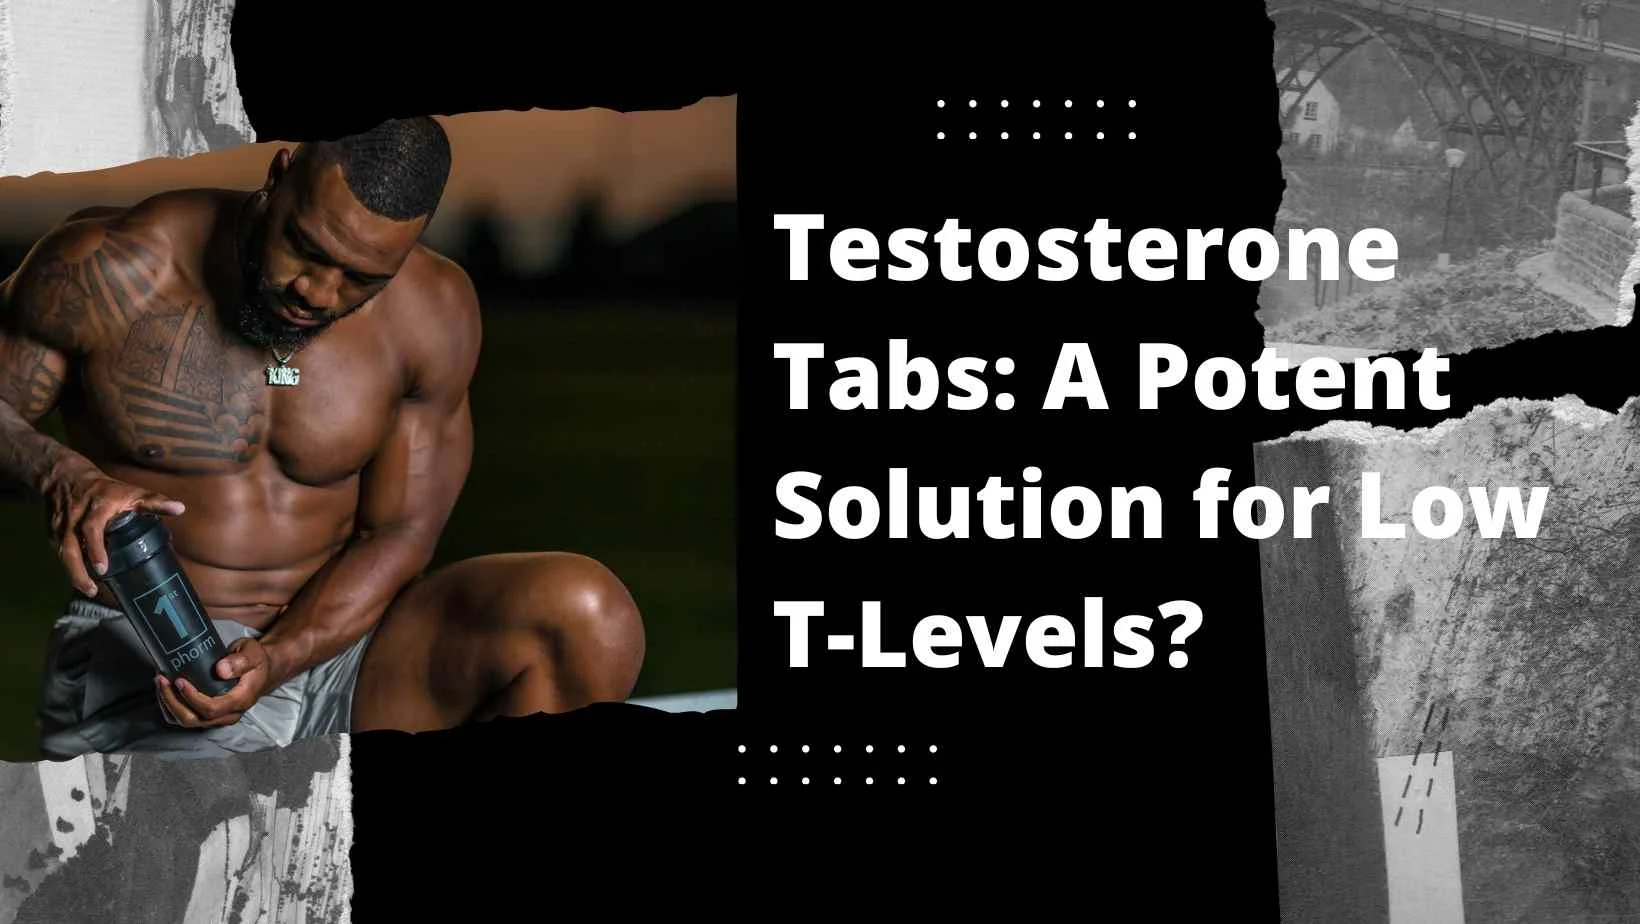 You are currently viewing Testosterone Tabs: A Potent Solution for Low T-Levels?